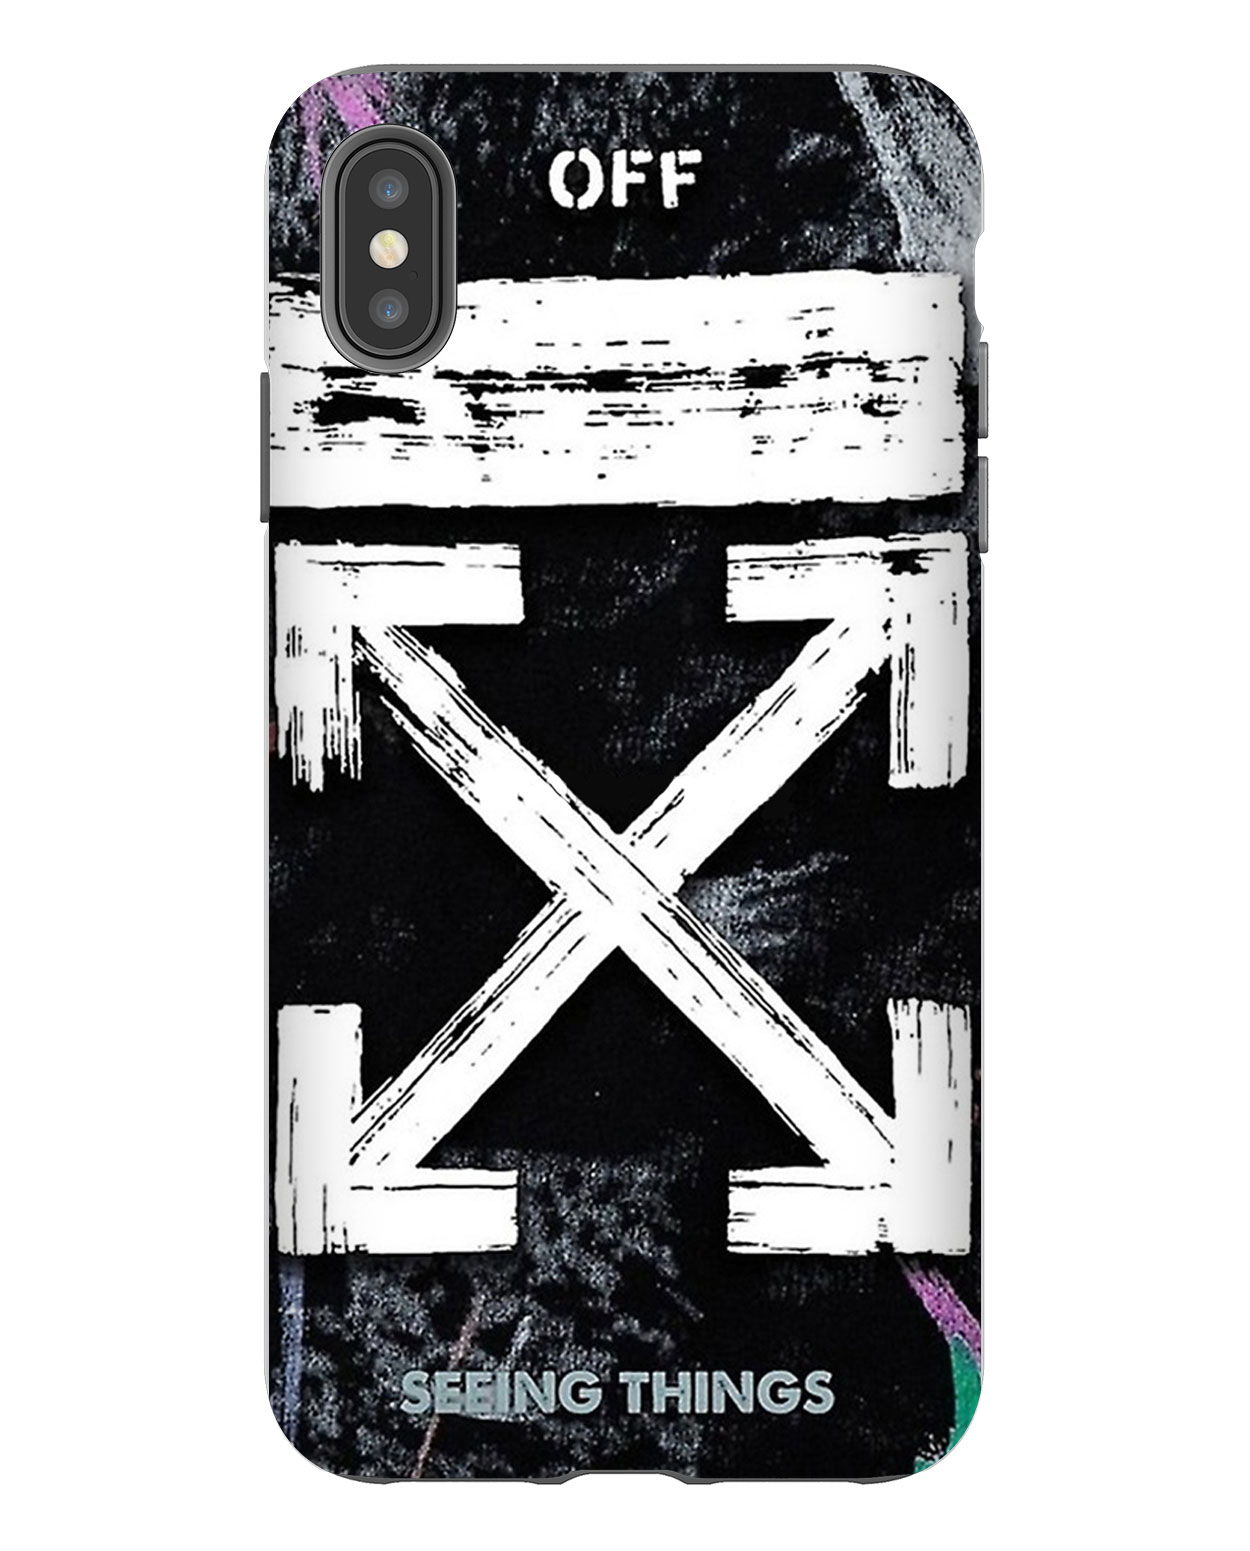 geduldig Picasso langs Off-White Seeing Things iPhone Case 7/7 Plus,8/8 Plus,X,XS,XR,XS,Max-  FEROLOS.COM